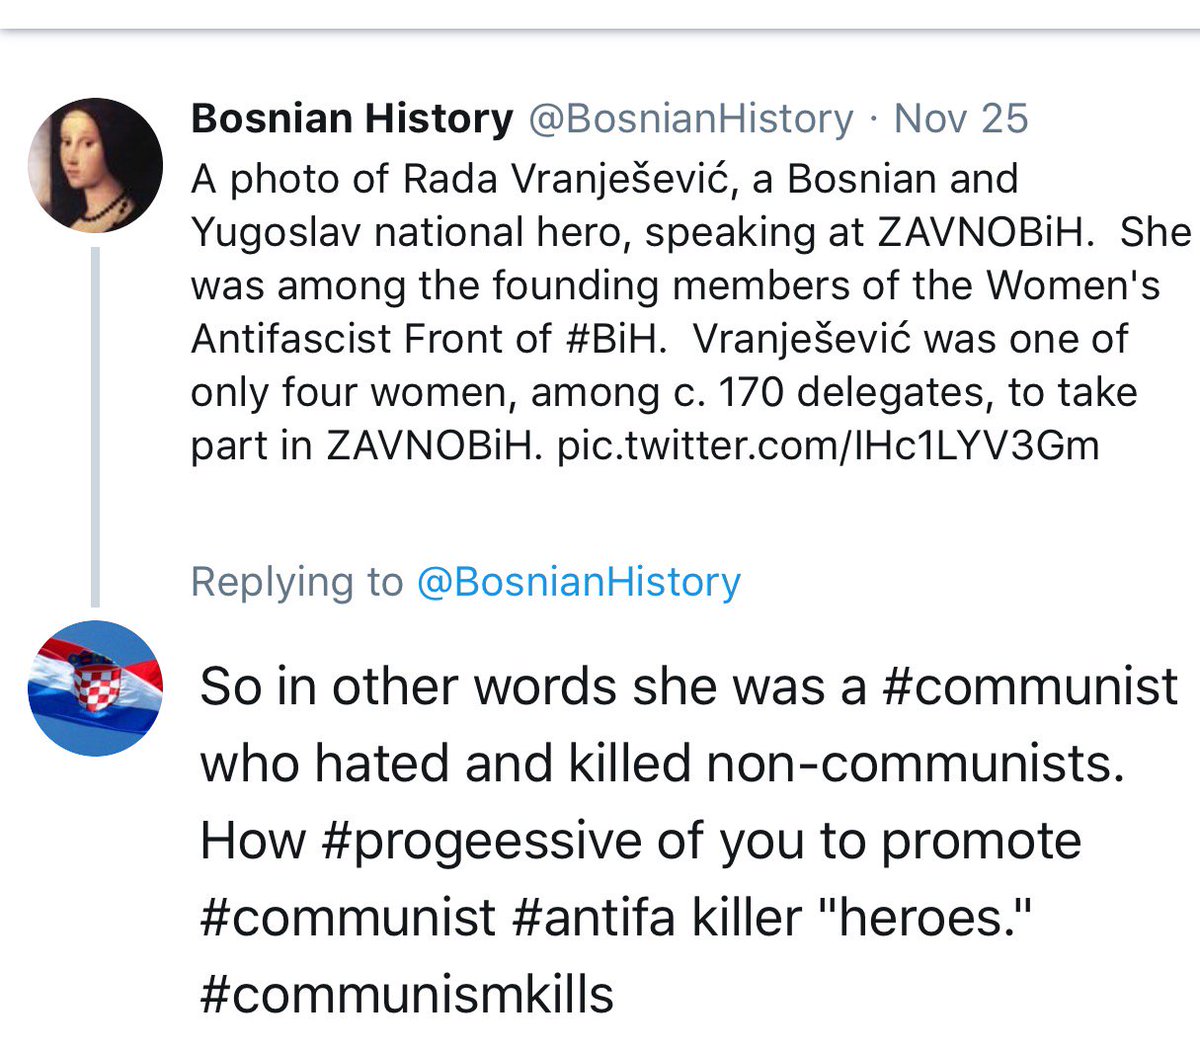 This is why there won't be peace in 'former Yugo' for a long time. #agitprop praise of #communist killers and #historical #revisionist sites like this spew utter garbage! Who still brags about #communists in 2017?!